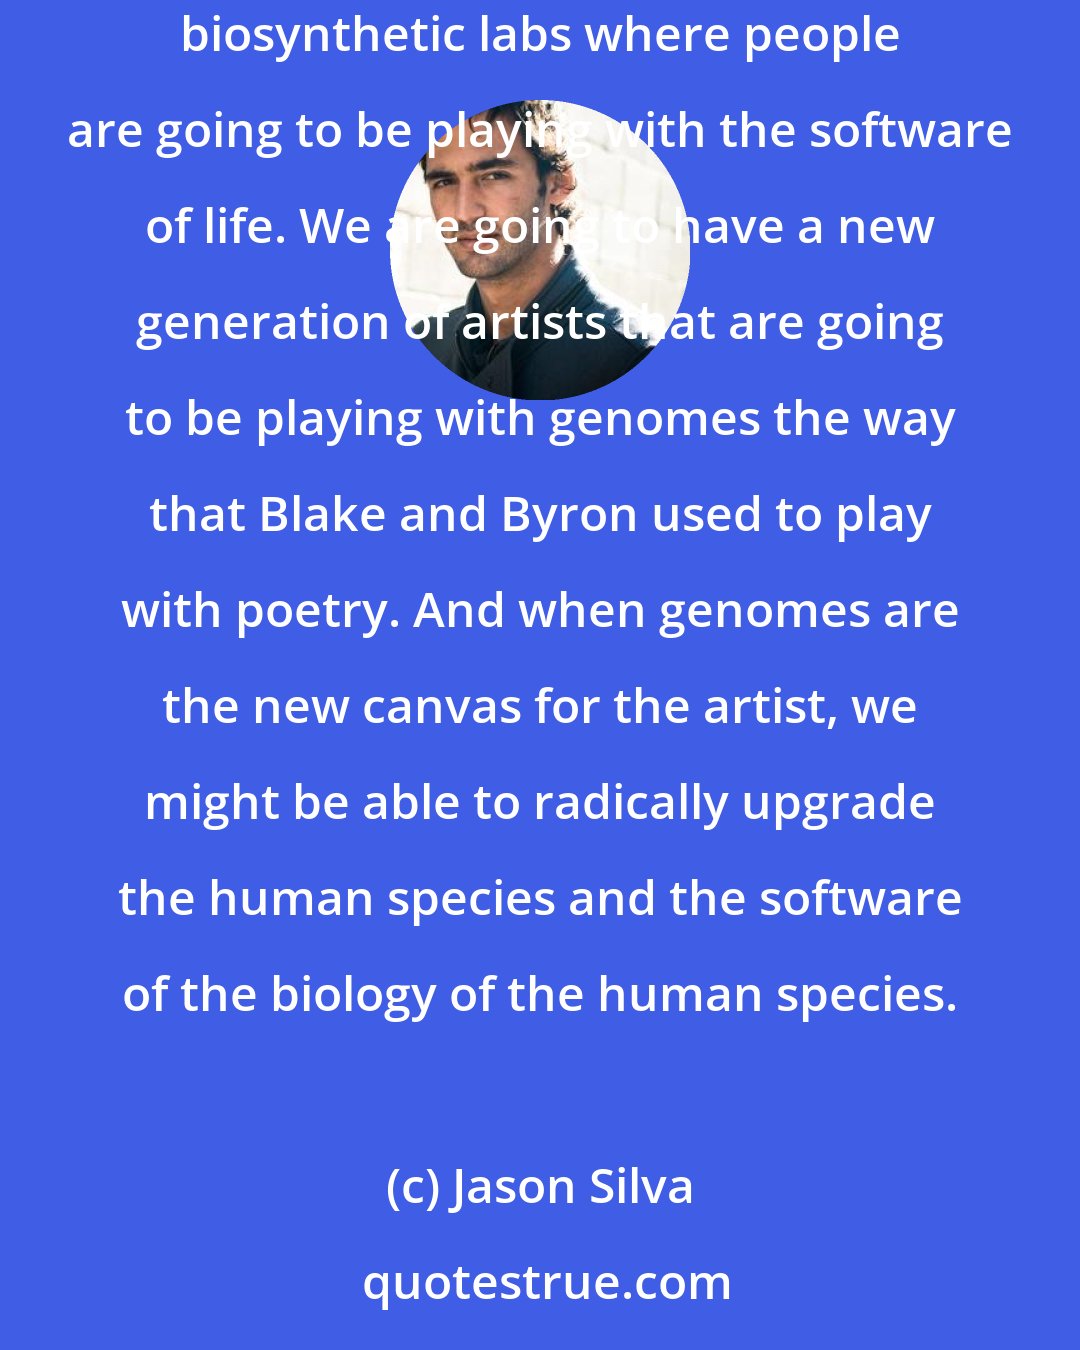 Jason Silva: I think one of the both liberating and terrifying prospects from synthetic biology for example is that you are going to have all of these do it yourself biosynthetic labs where people are going to be playing with the software of life. We are going to have a new generation of artists that are going to be playing with genomes the way that Blake and Byron used to play with poetry. And when genomes are the new canvas for the artist, we might be able to radically upgrade the human species and the software of the biology of the human species.